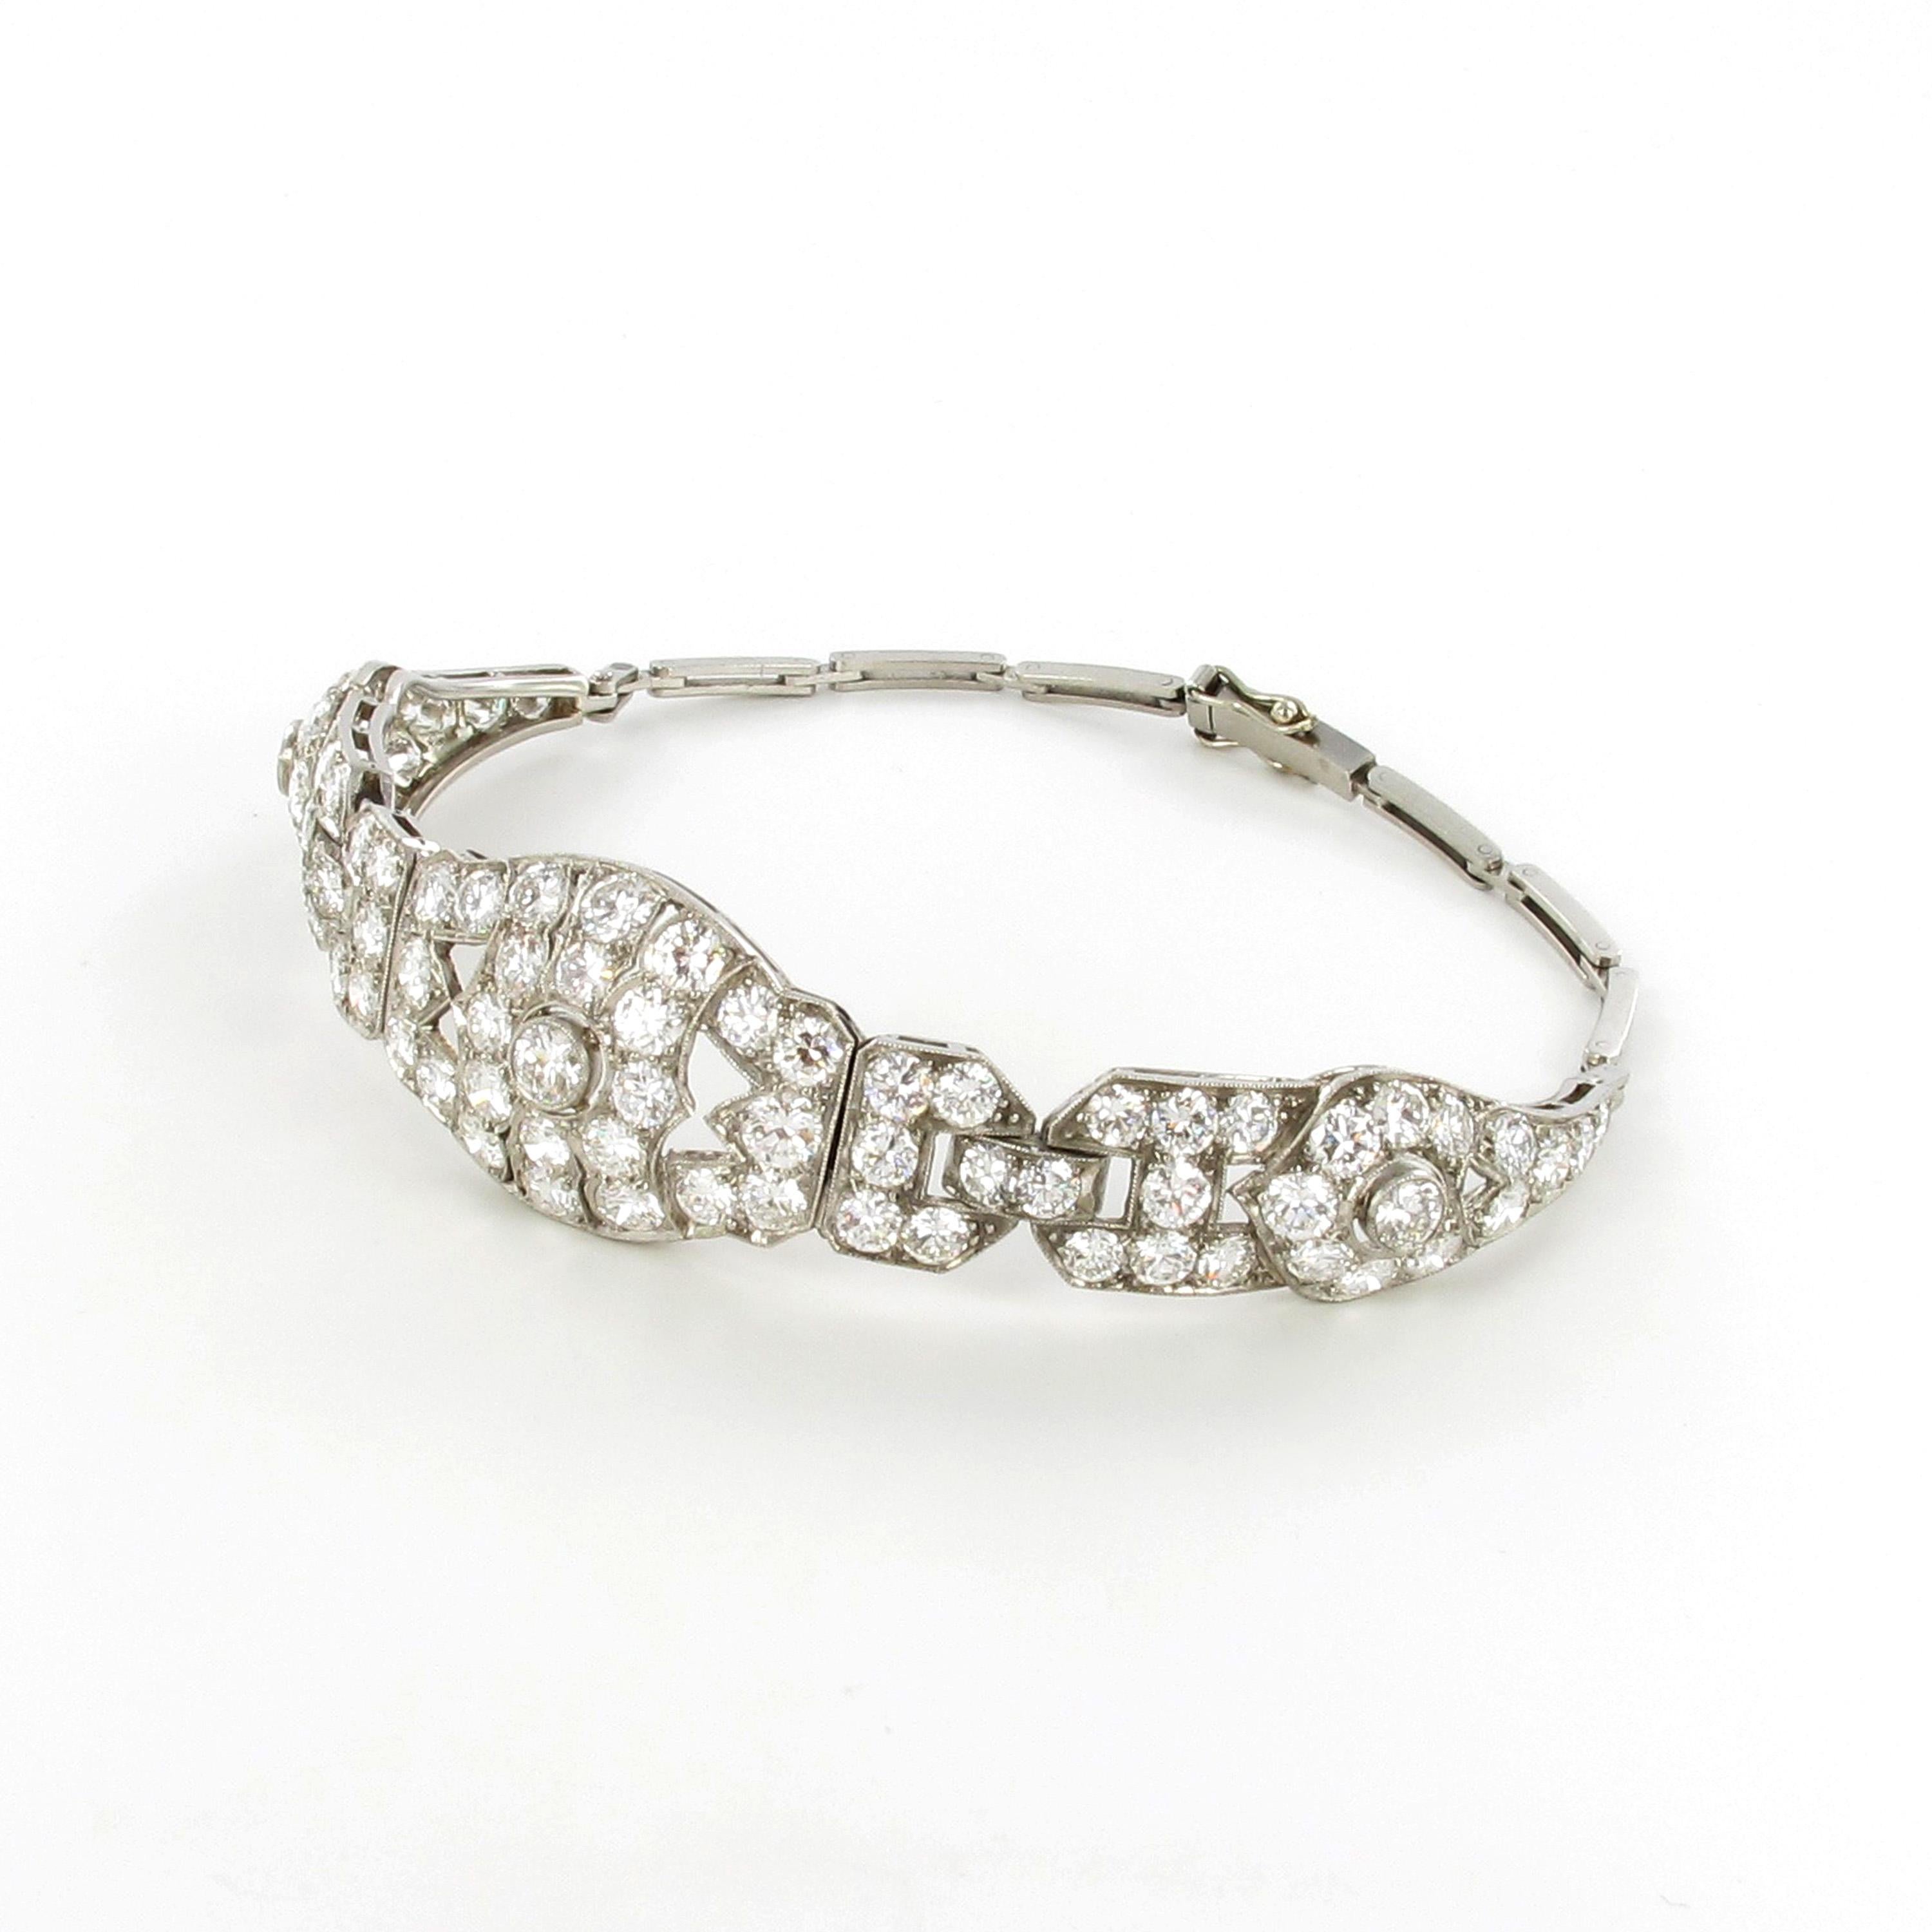 Mid Century Diamond Bracelet in Platinum 950 In Good Condition For Sale In Lucerne, CH